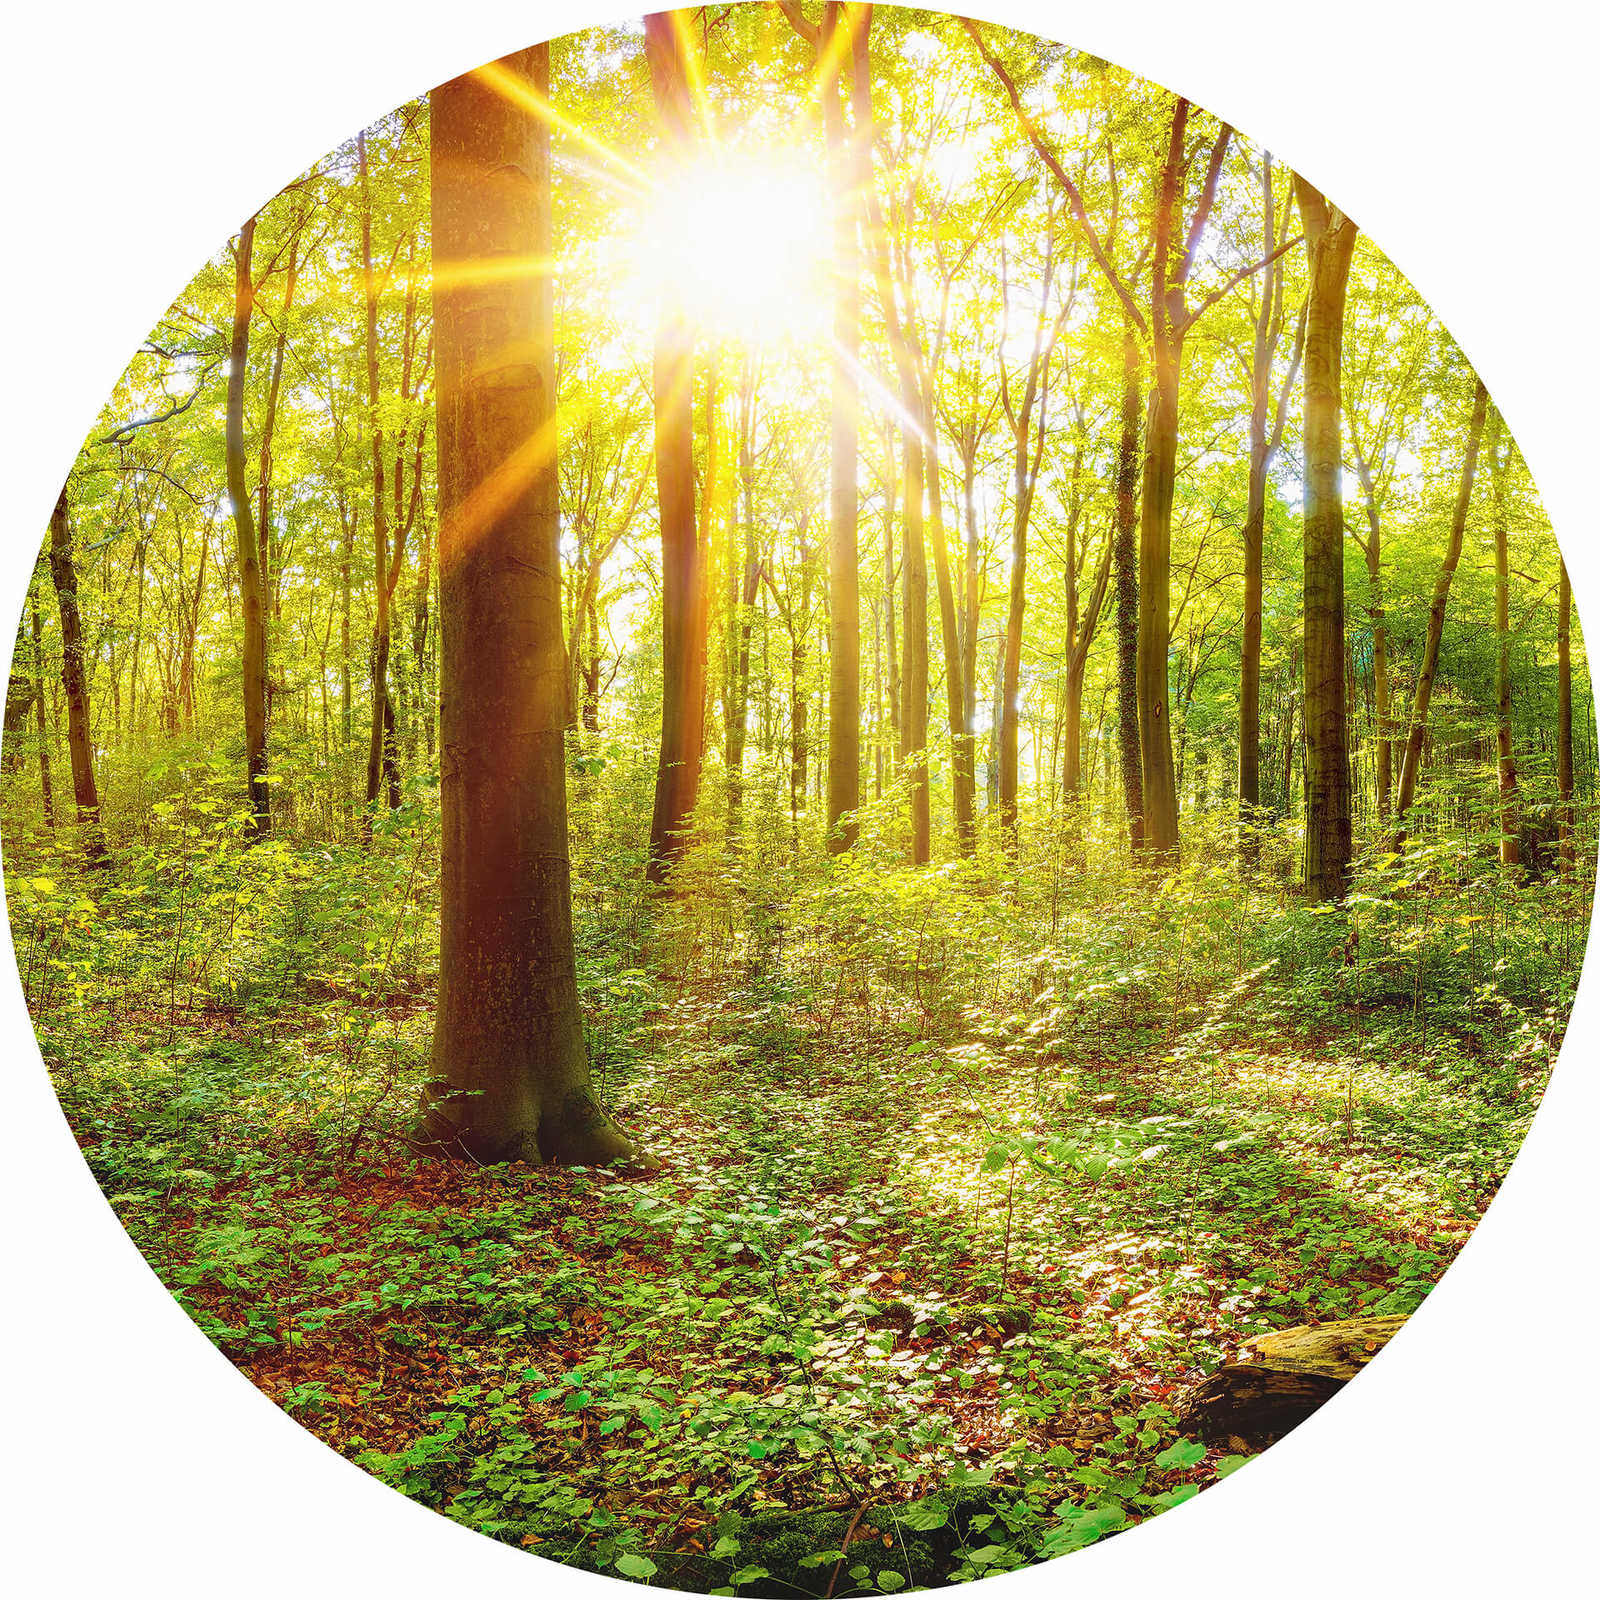         Photo wallpaper round sunny forest - green, brown
    